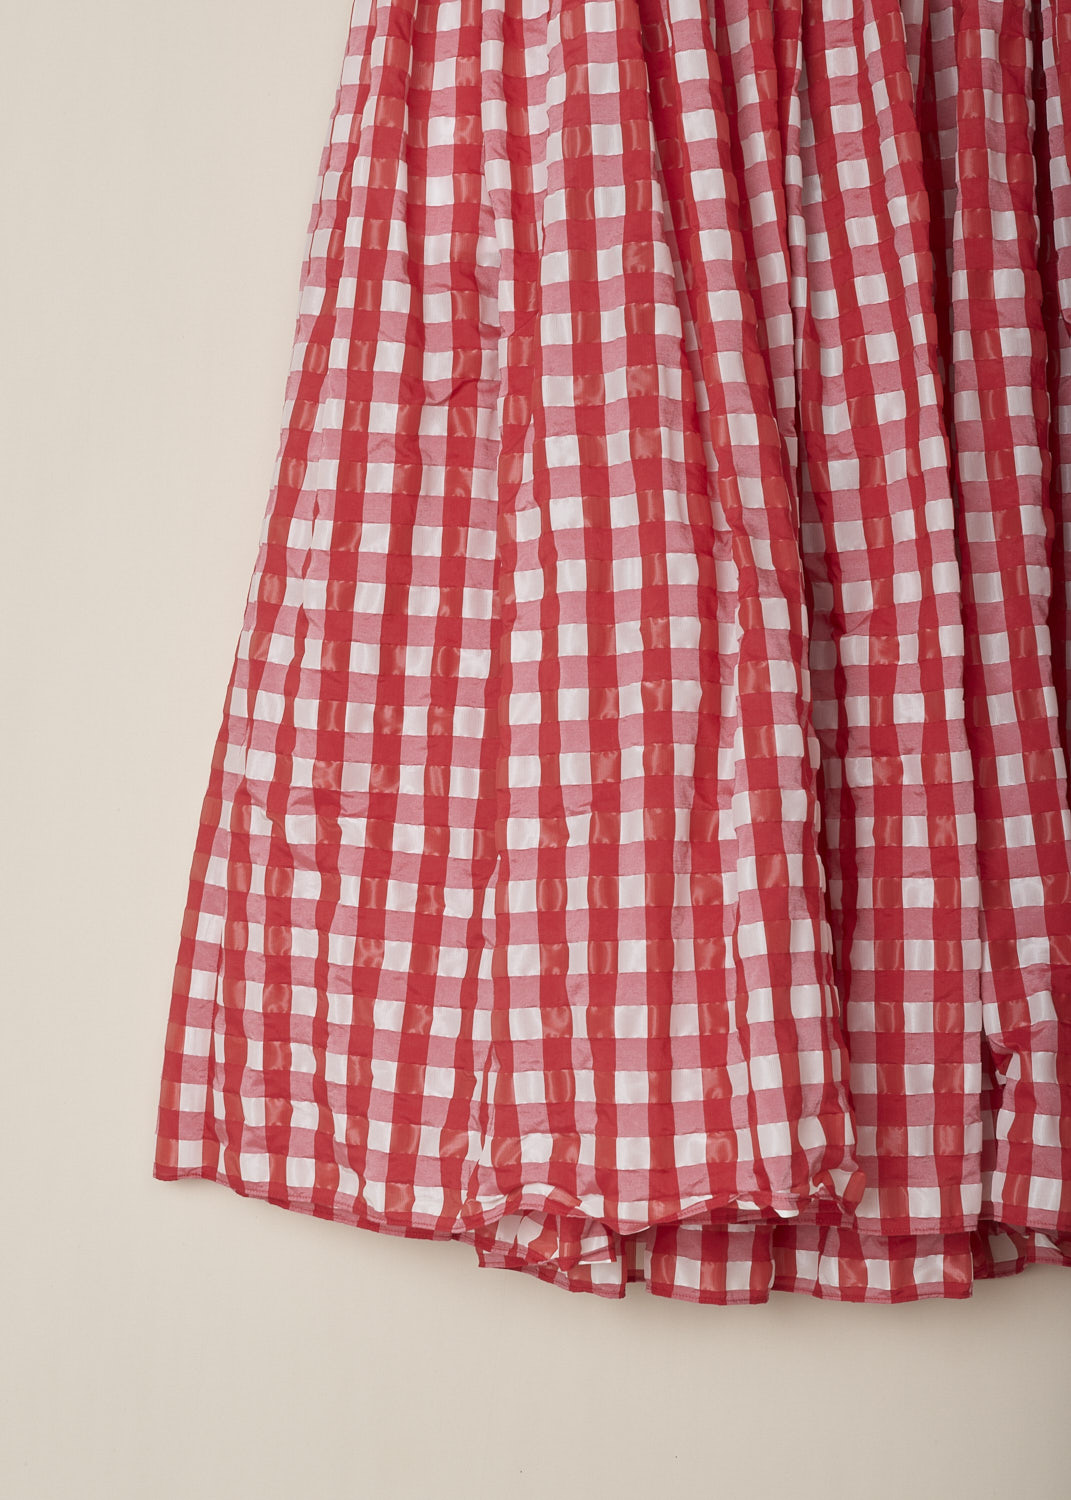 ALAÏA, RED GINGHAM MAXI SKIRT, AA9J04644T577, Red, White, Print, Detail 1, This high-waisted red gingham maxi skirt hugs the waist and flares out to a voluminous maxi skirt. The skirt has concealed slanted pockets. In the back, a concealed centre zip functions as the closure option. 

